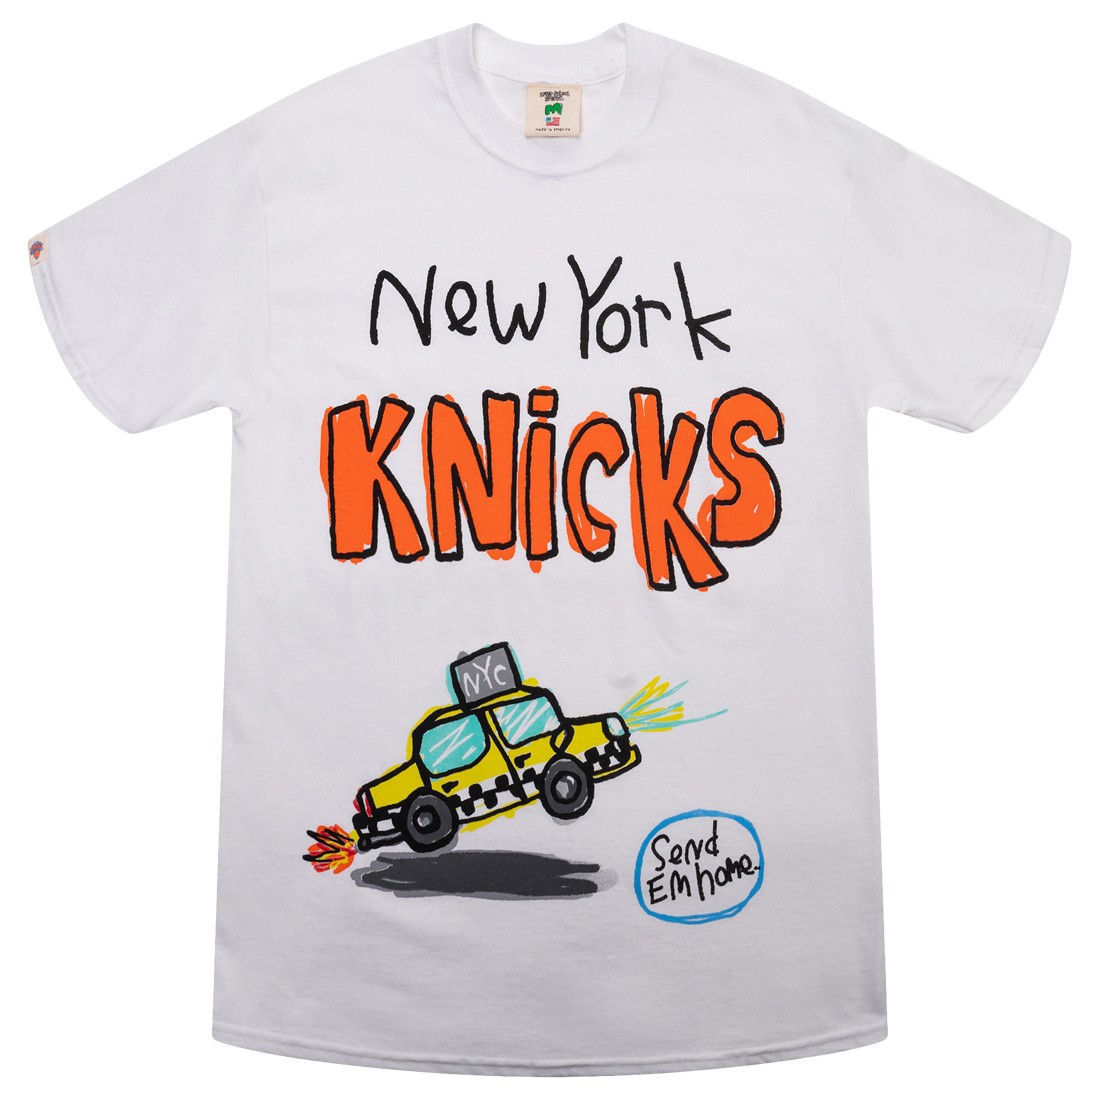 After School Special x NBA Men Knicks Doodle Tee (white)